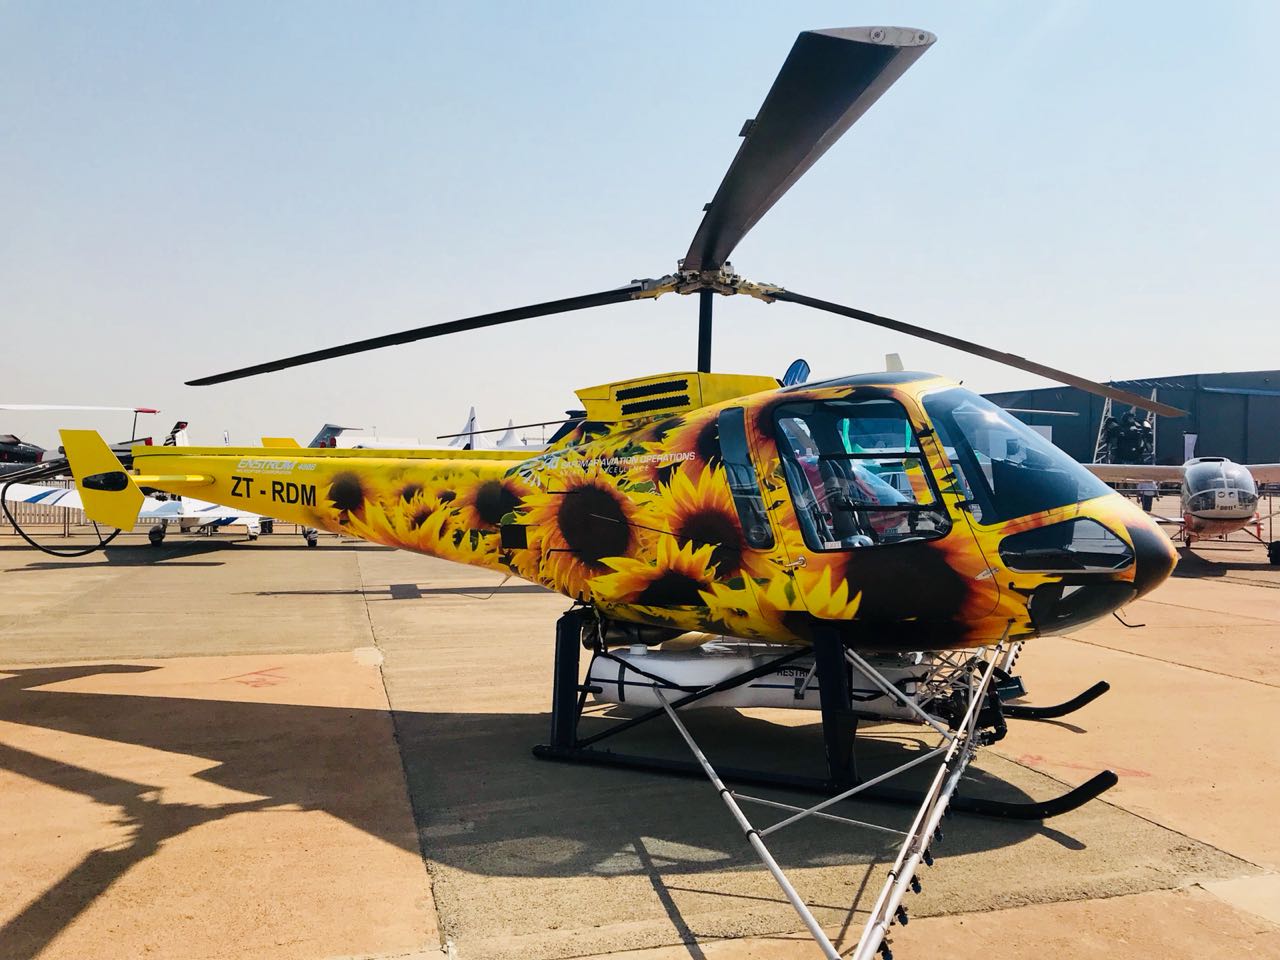 Shown is a 480B turbine helicopter in crop spraying configuration, which is on display at the AAD expo. Enstrom Photo